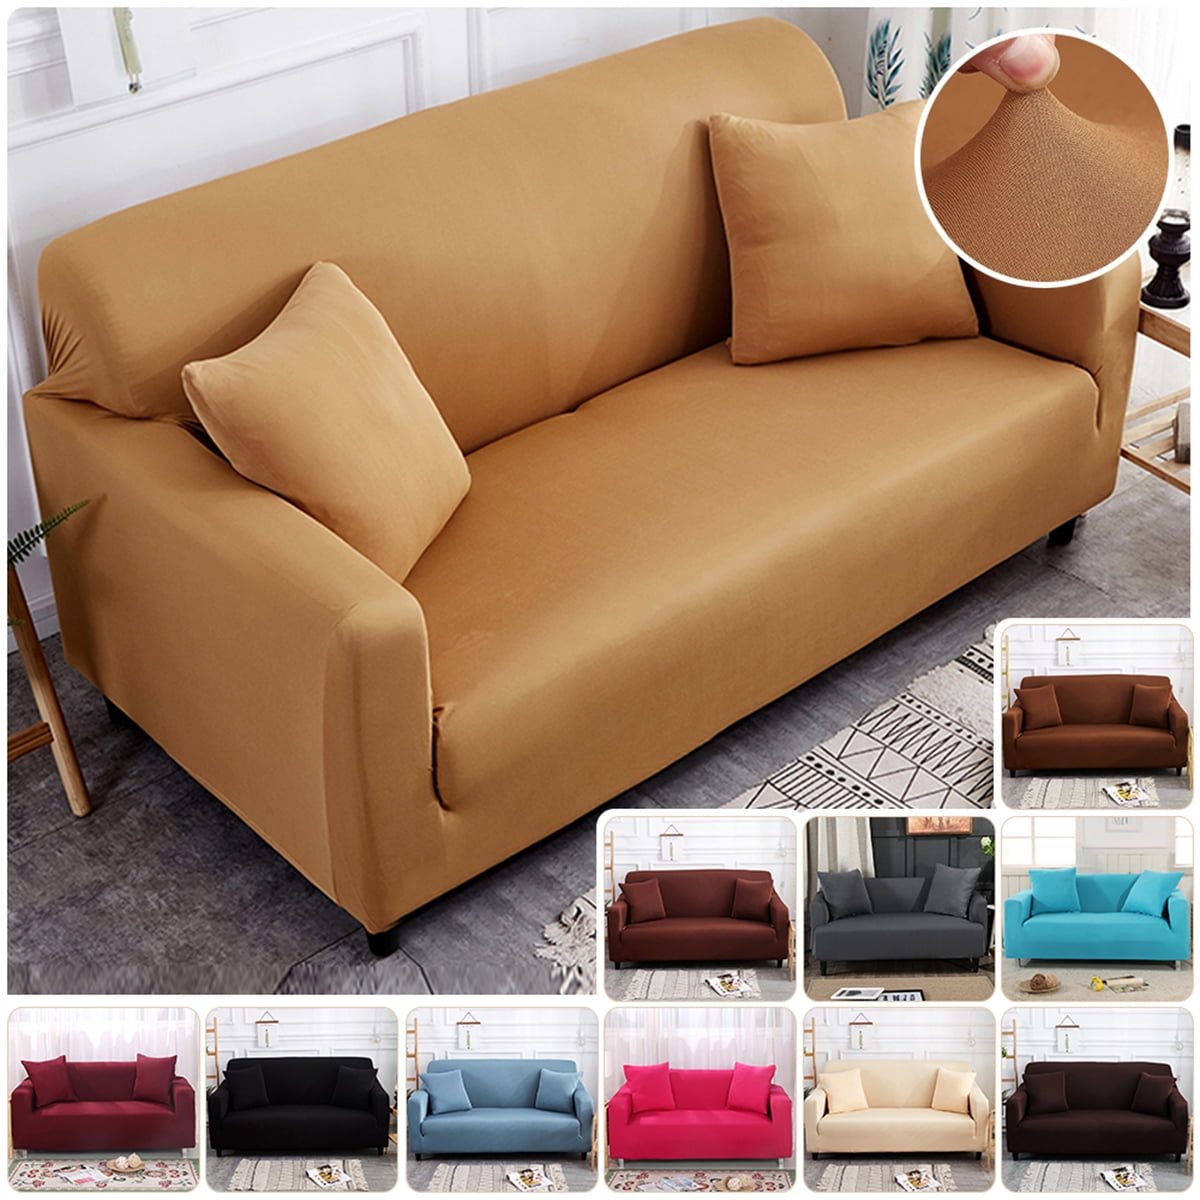 Details about   Household Stretch Furniture Covers for Chairs Soft Sofa Slipcovers Resistance US 